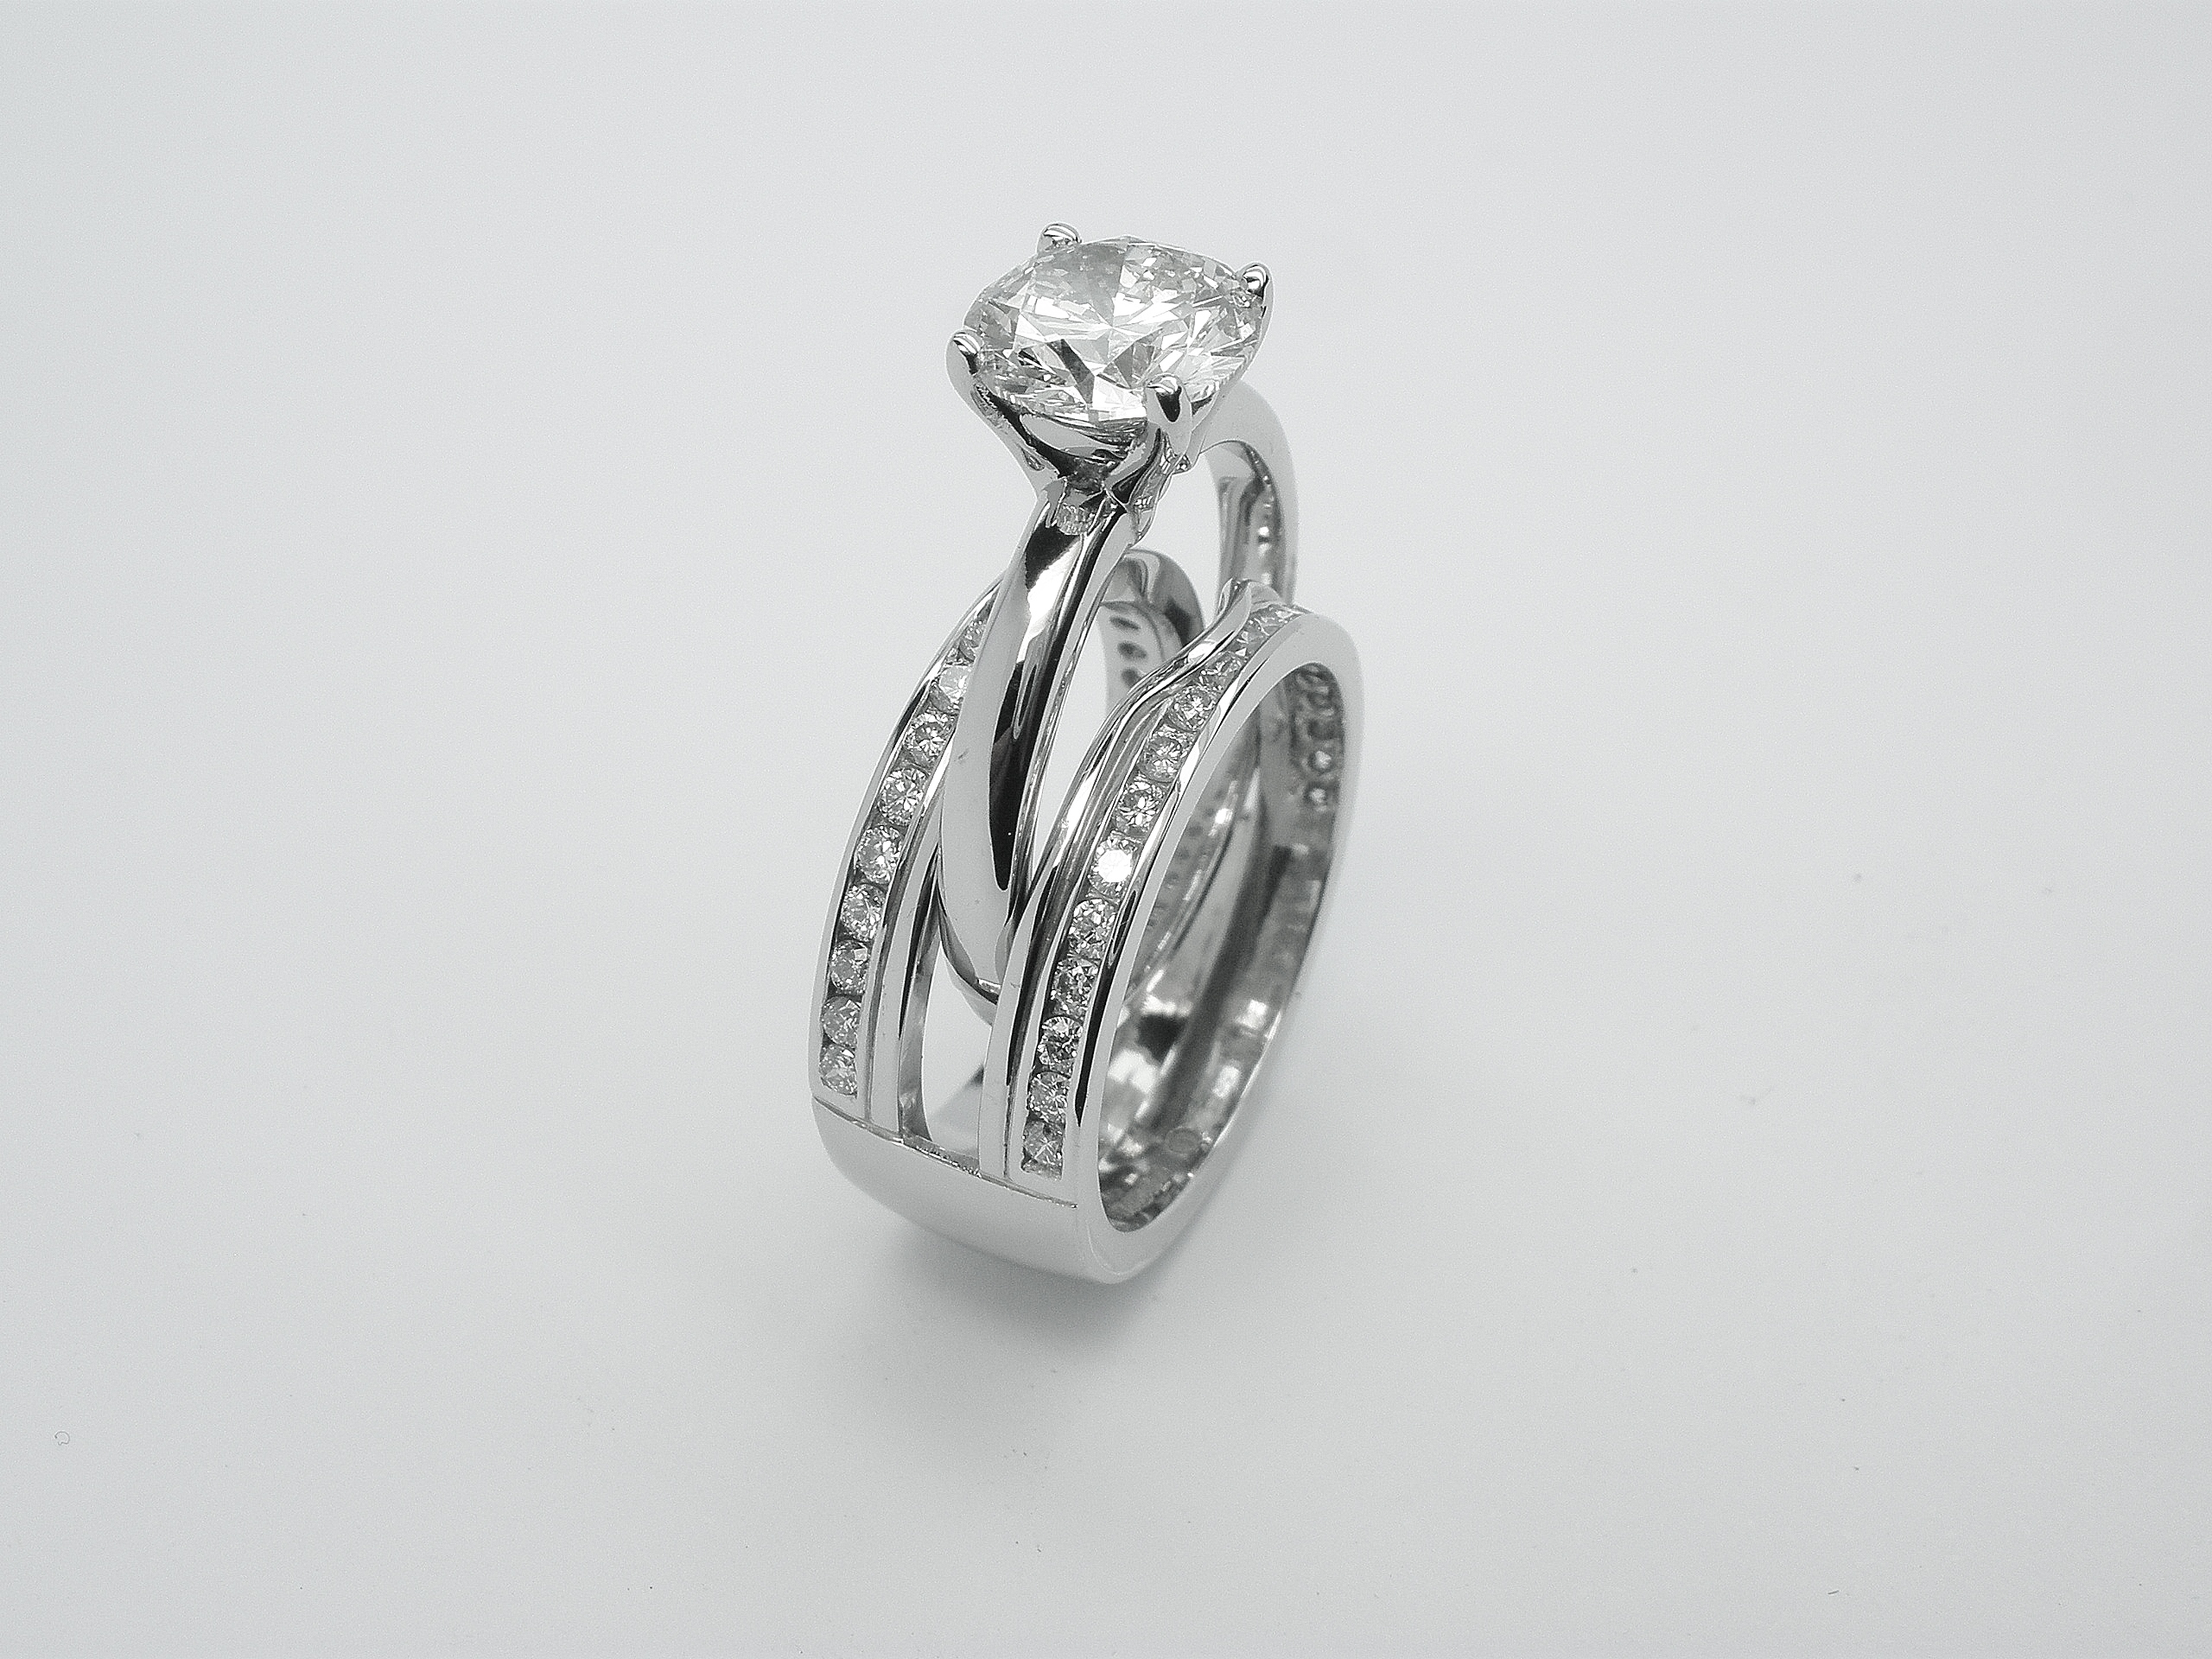 Double 'Embrace' platinum wedding ring channel set with round brilliant diamonds & created to receive the insertion of a single stone round diamond engagement ring.